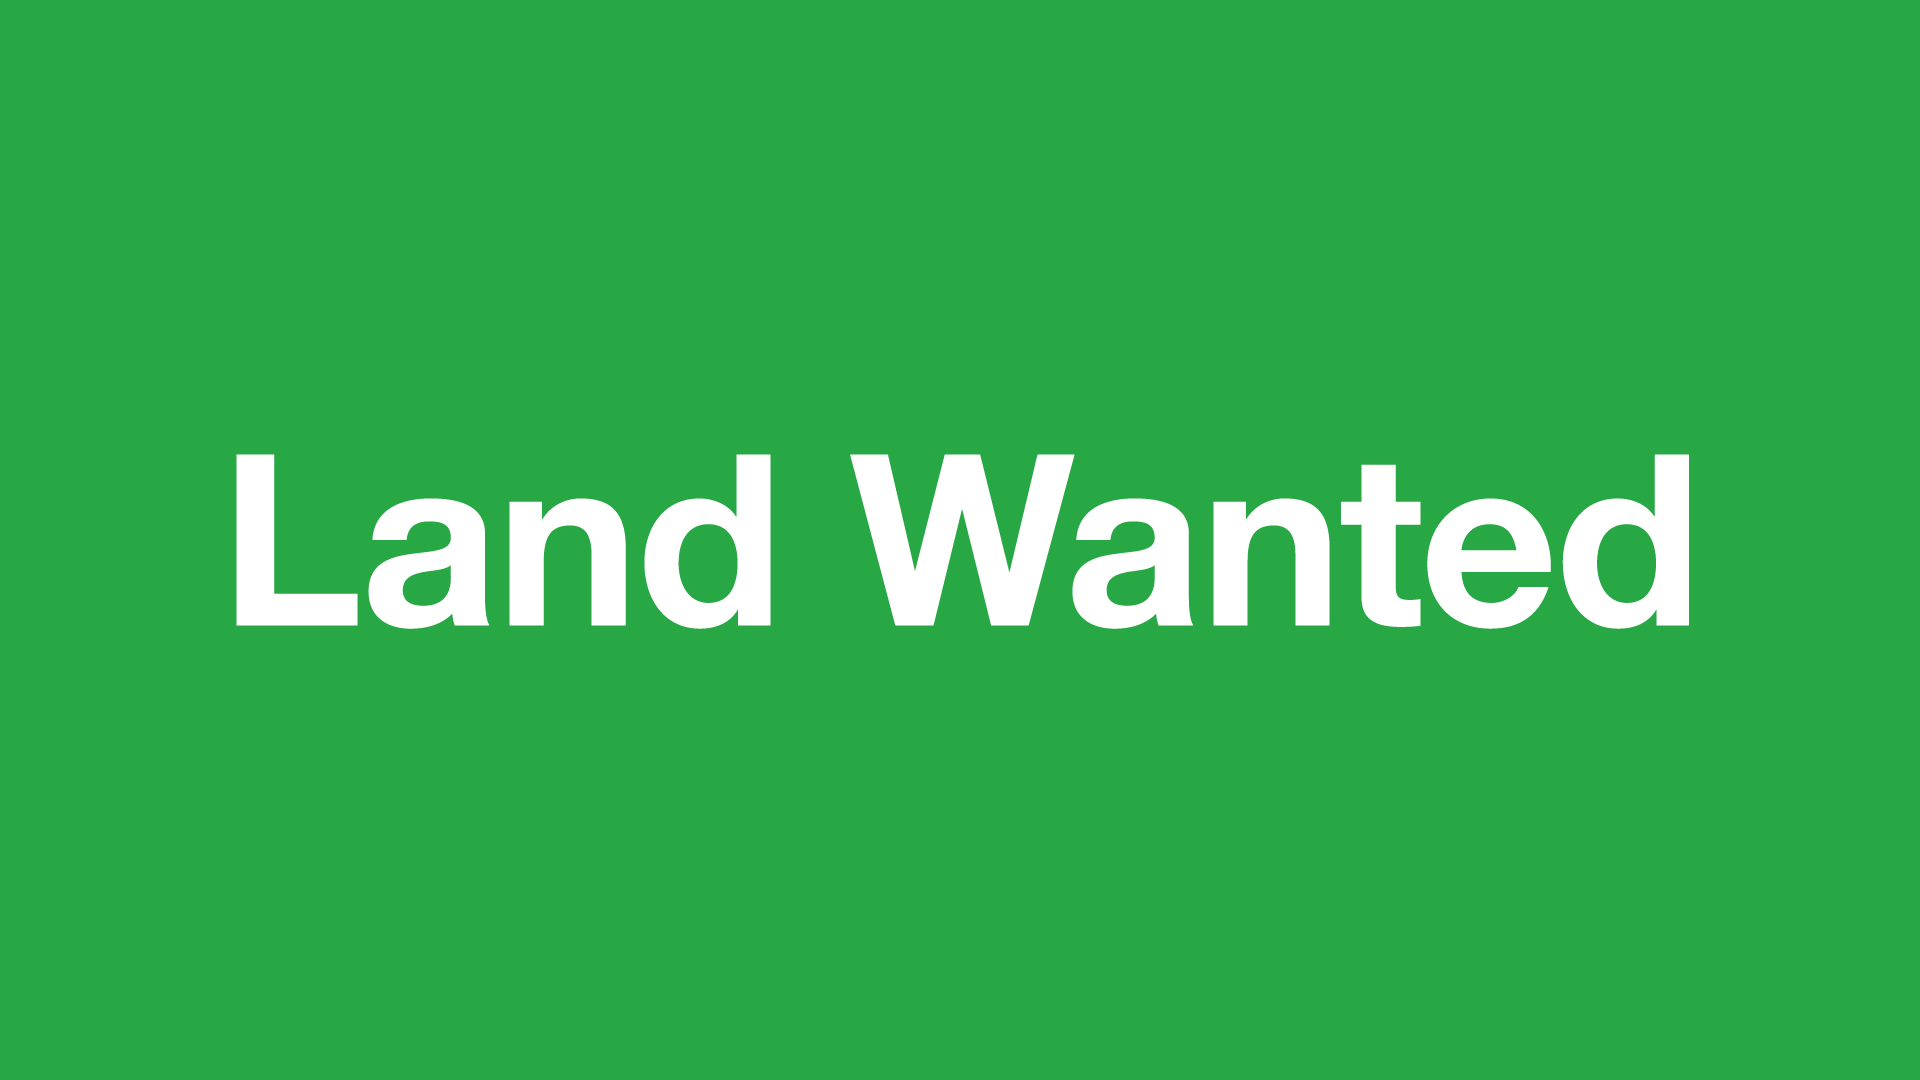 Land wanted